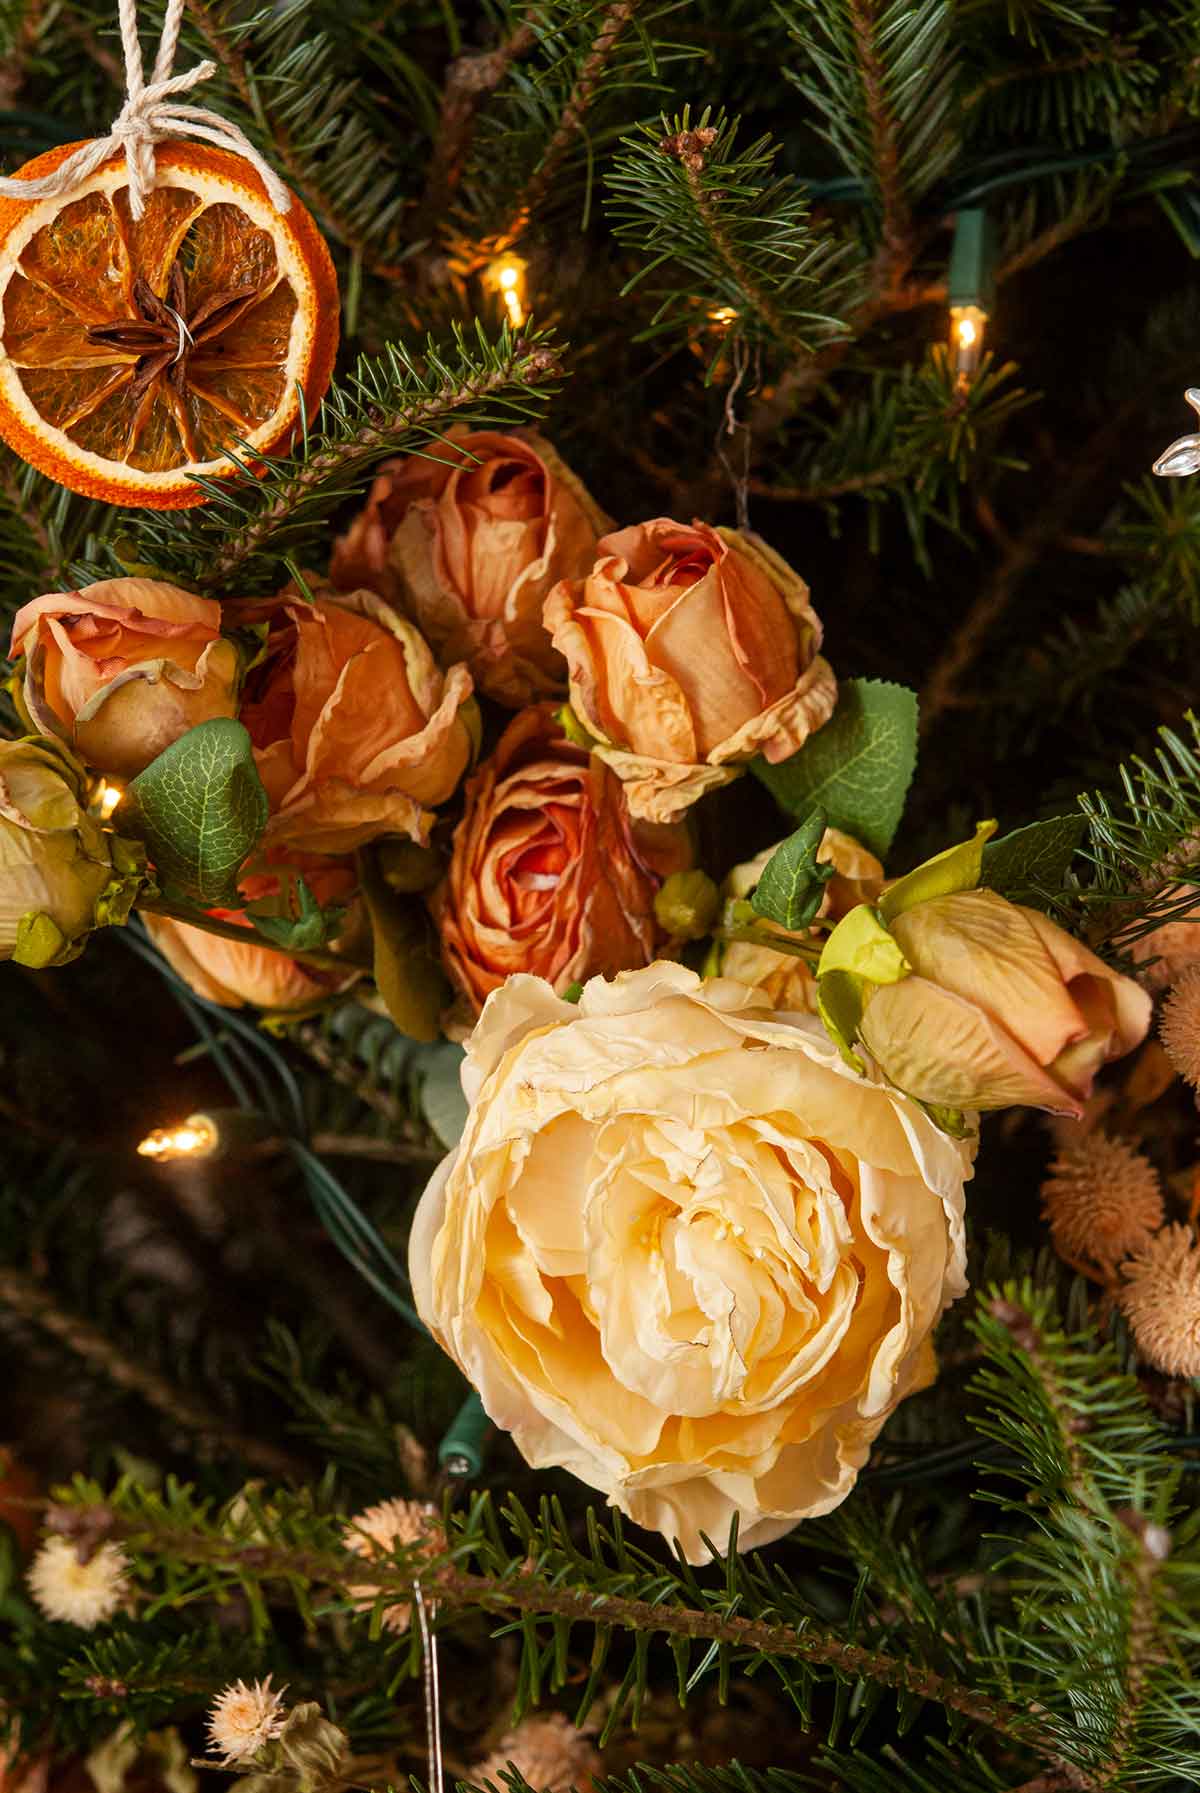 A bunch of roses in a Christmas tree with lights and a citrus ornament.